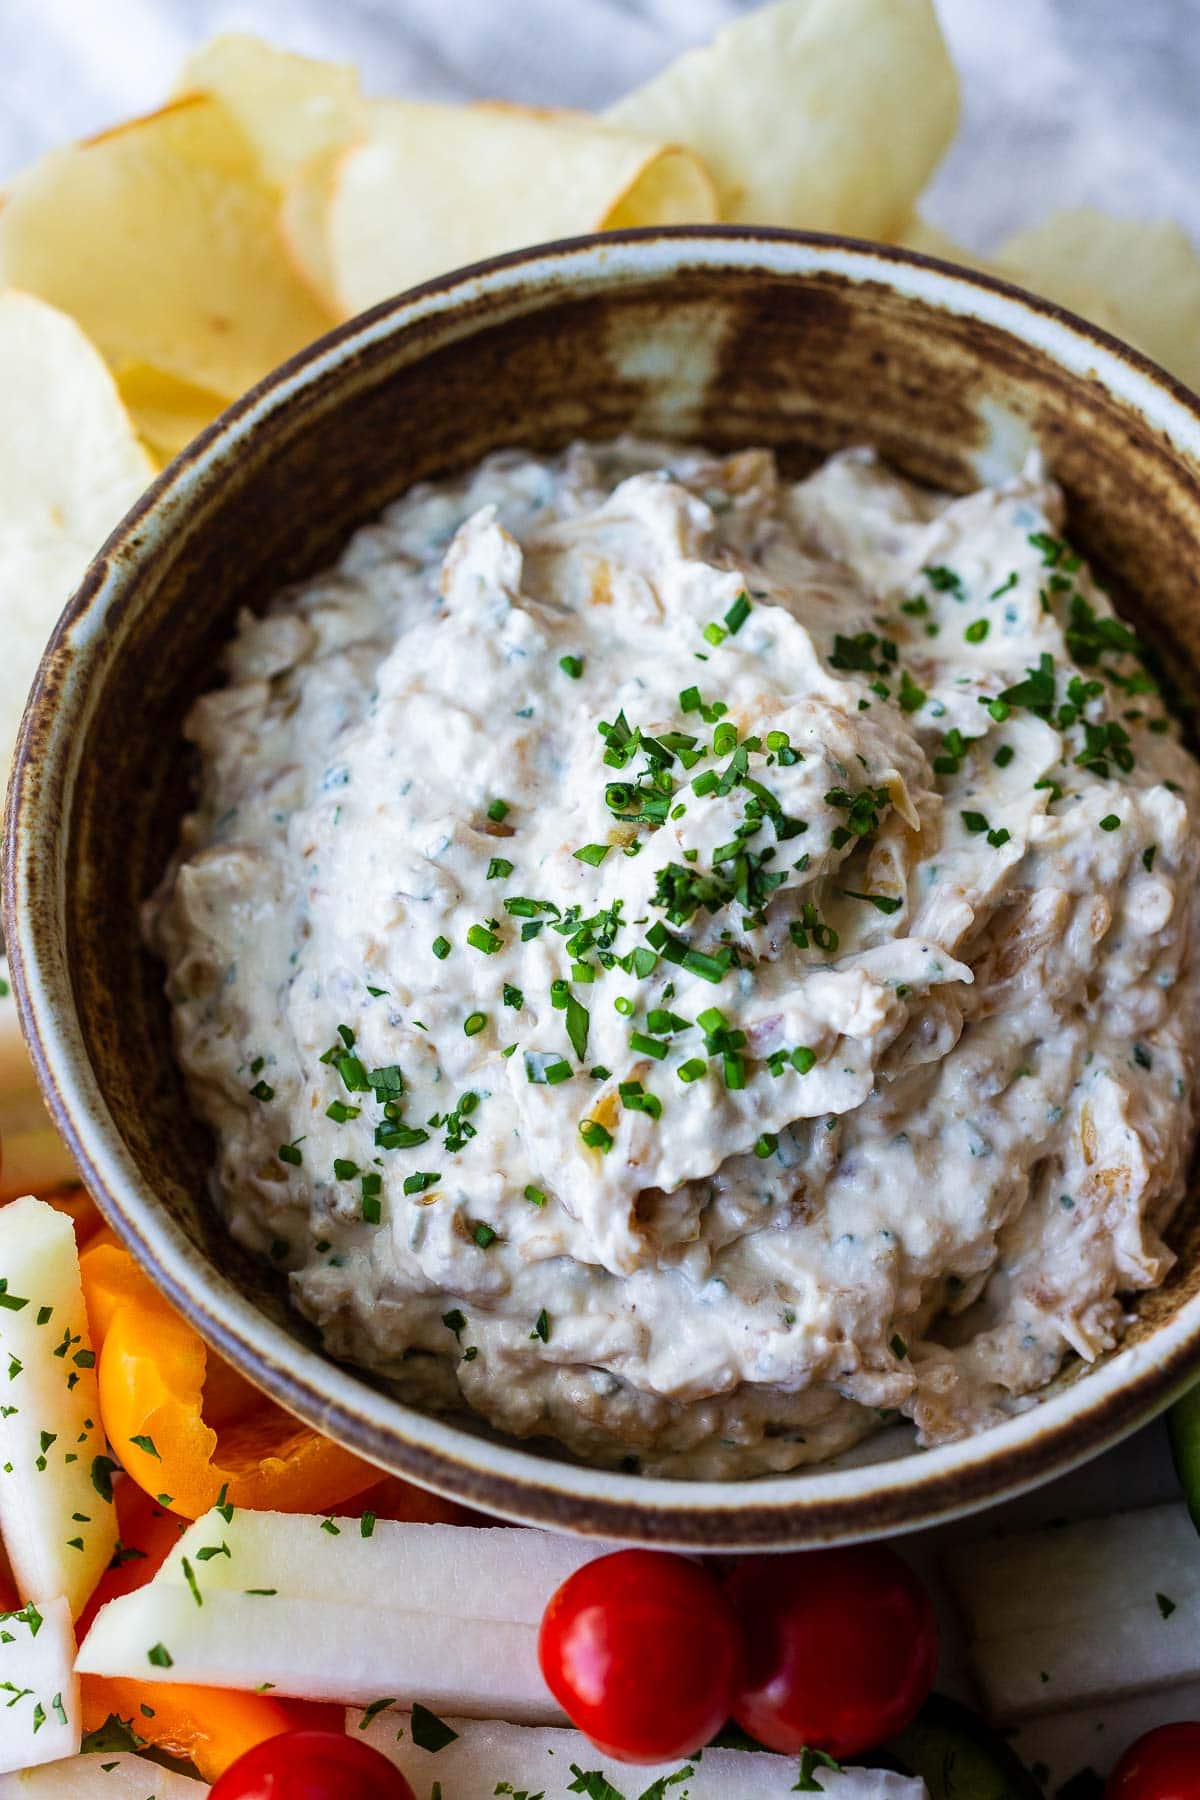 A delicious healthy take on French Onion Dip made with caramelized onions, creamy Greek yogurt, and fresh herbs. A perfect make ahead appetizer for potlucks and parties.